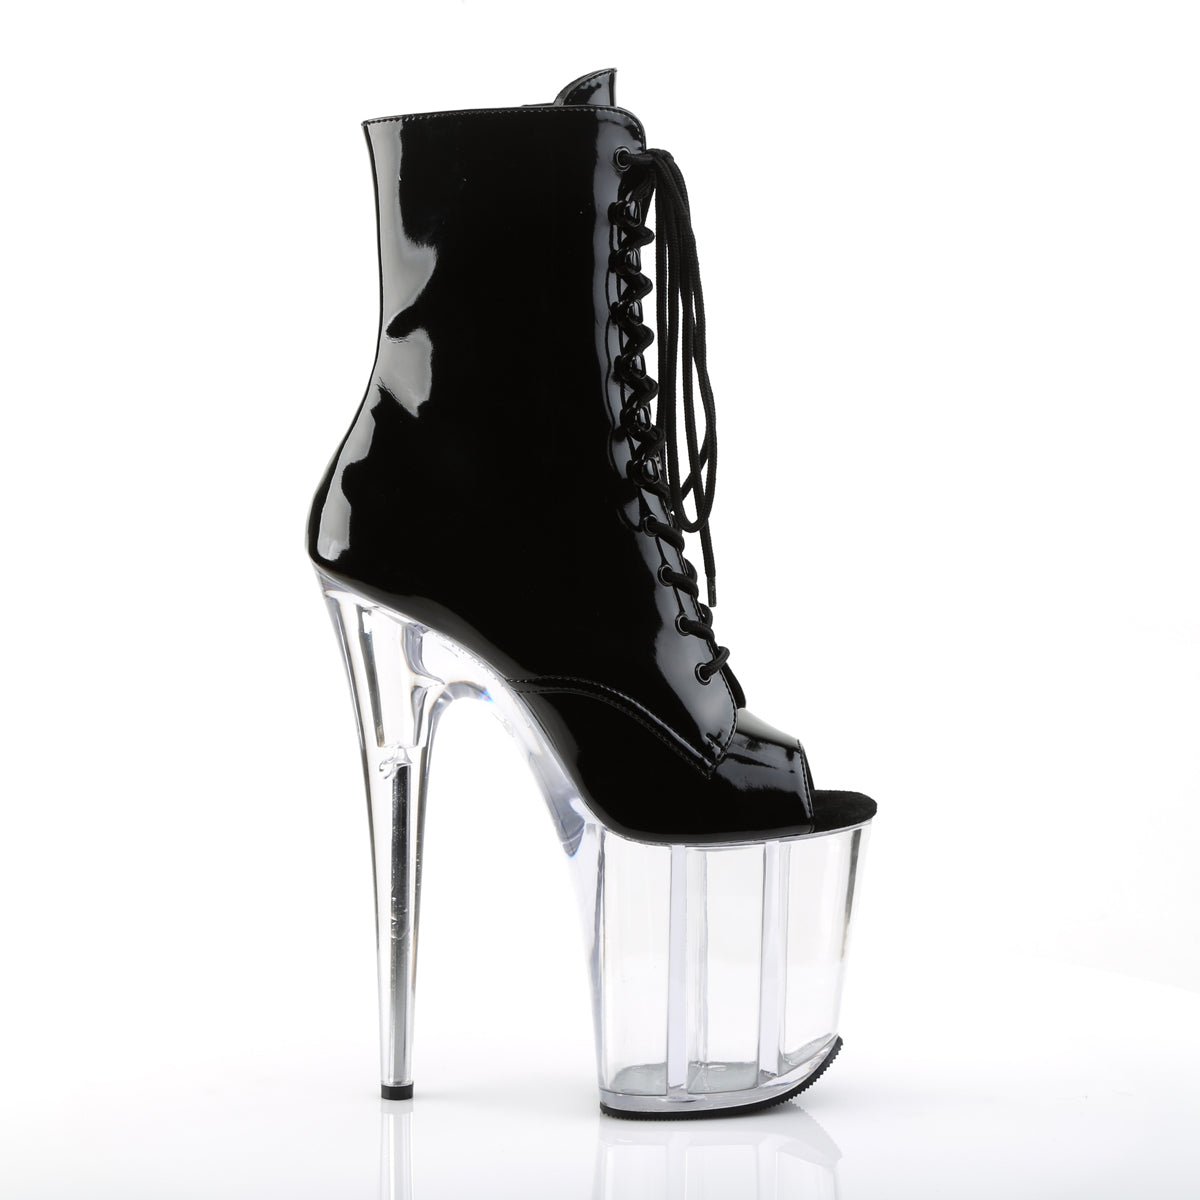 FLAMINGO-1021 8" Heel Black and Clear Pole Dancing Platforms-Pleaser- Sexy Shoes Fetish Heels